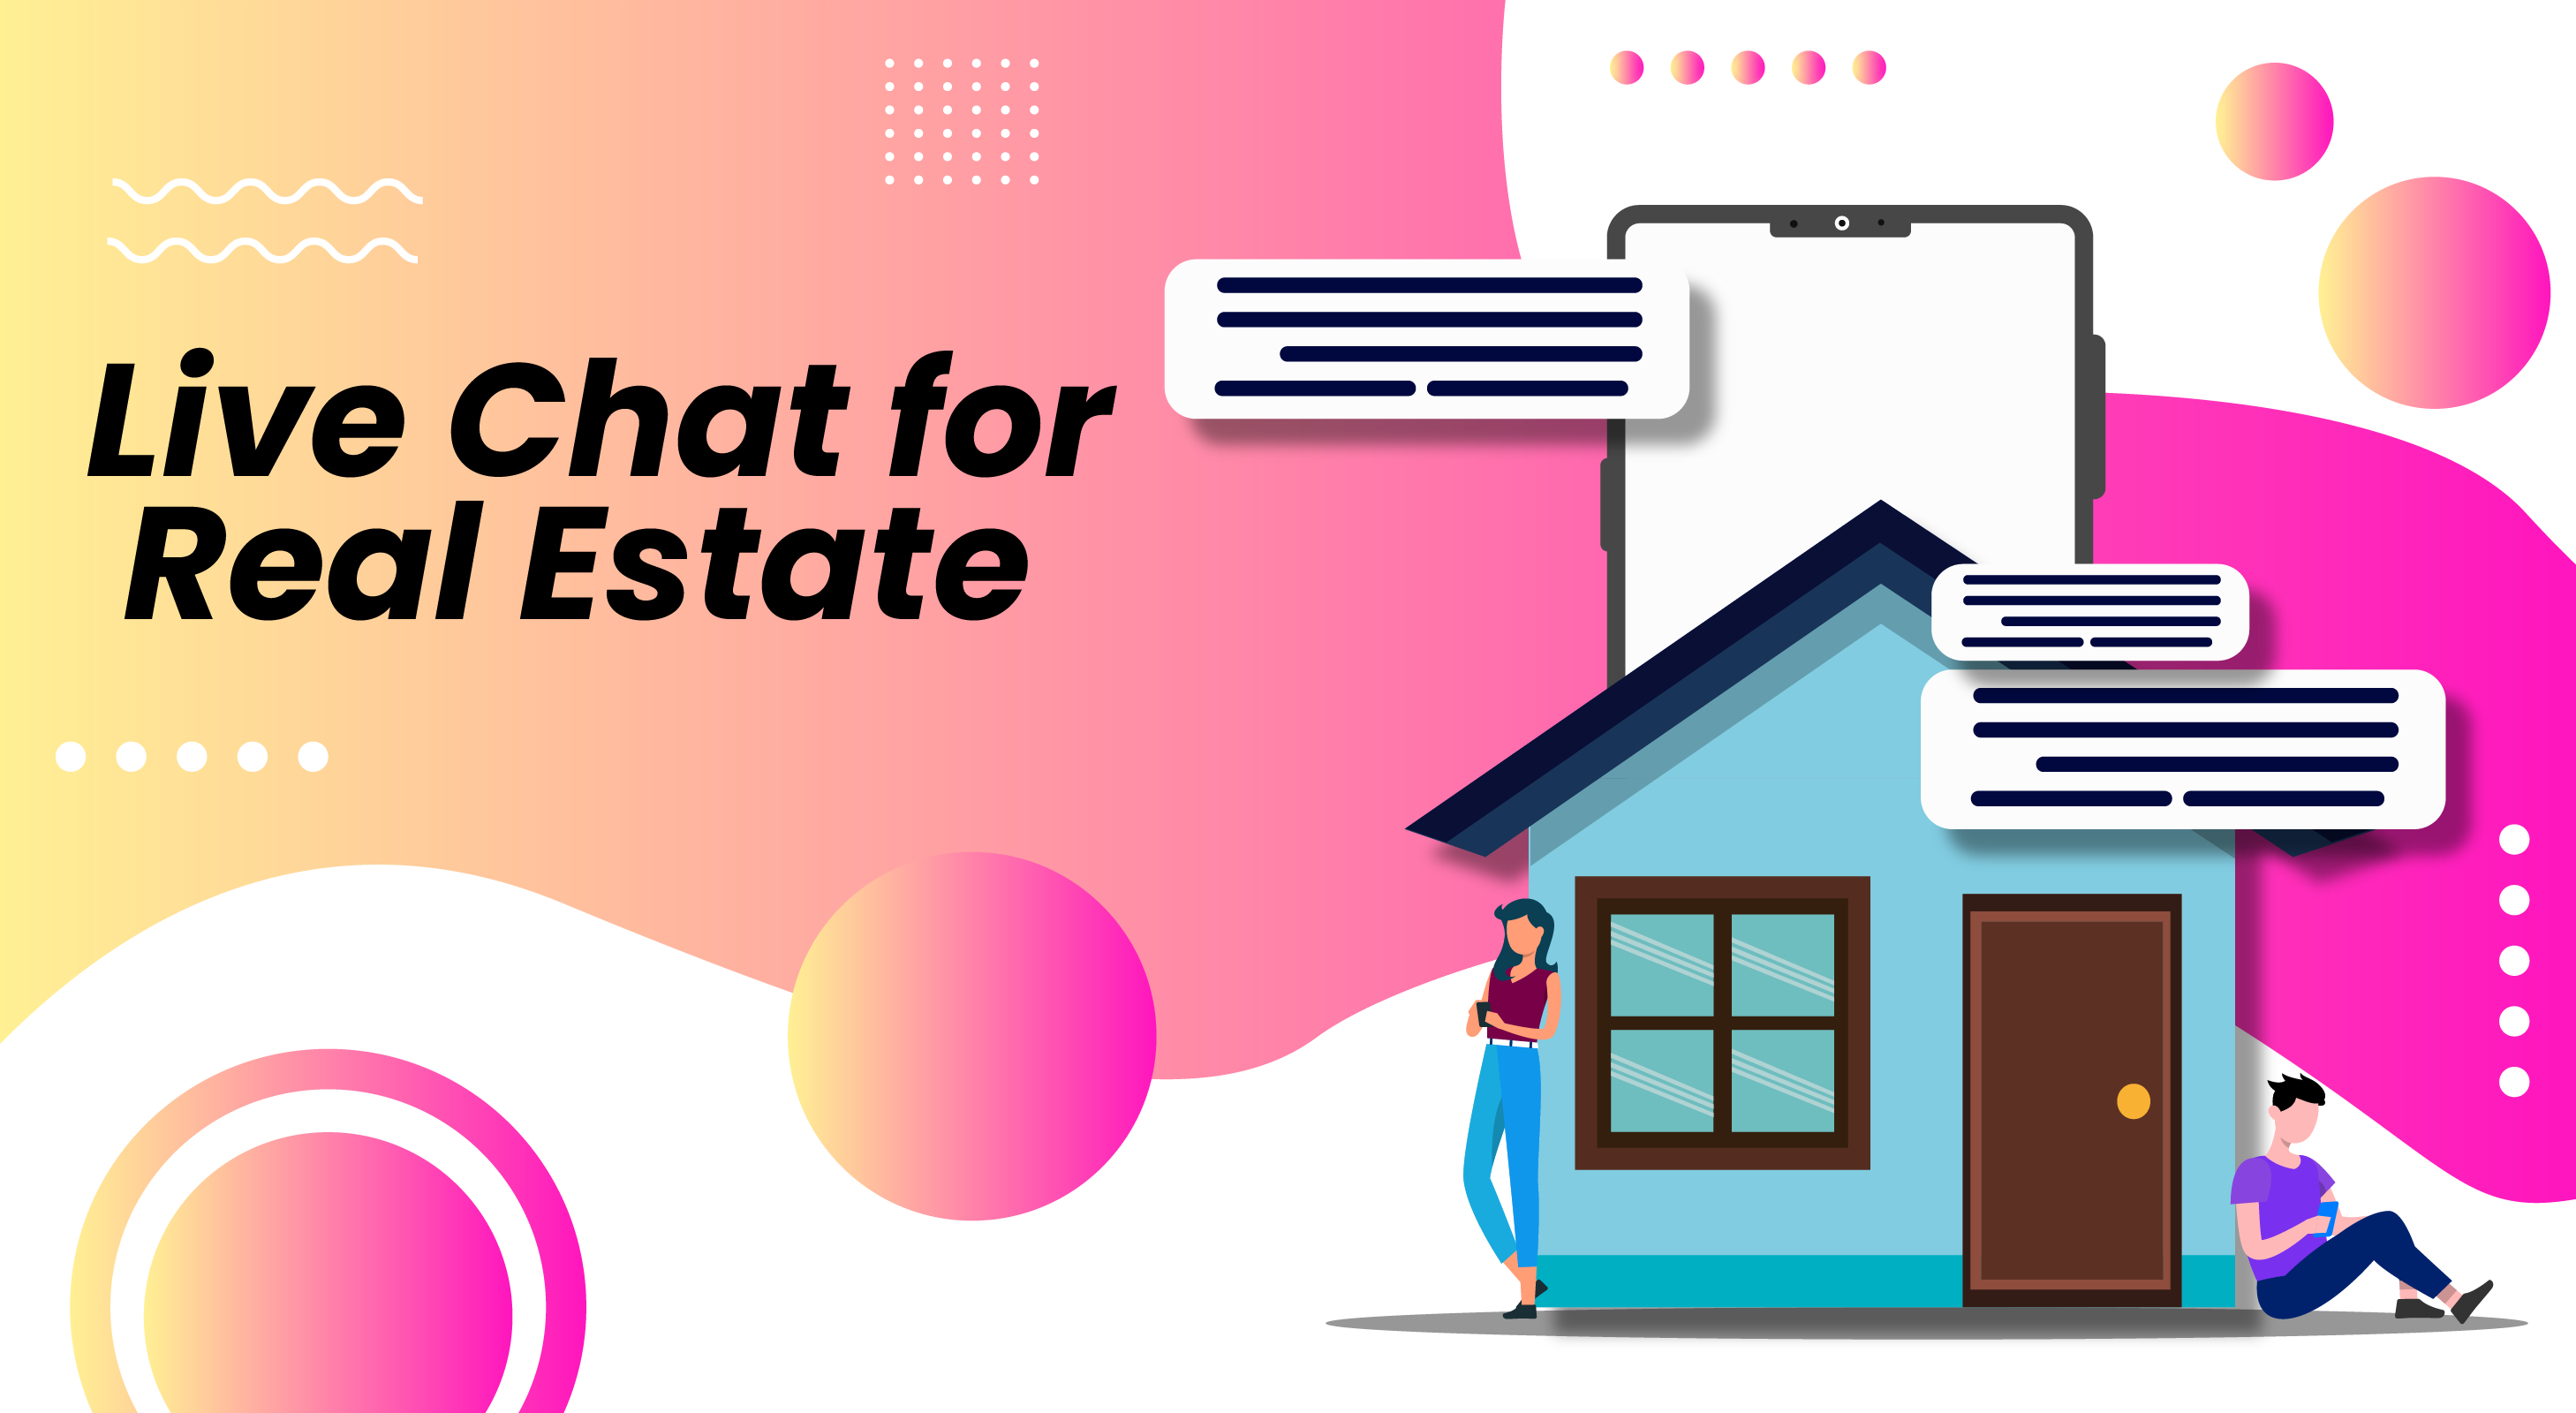 Live Chat for Real Estate